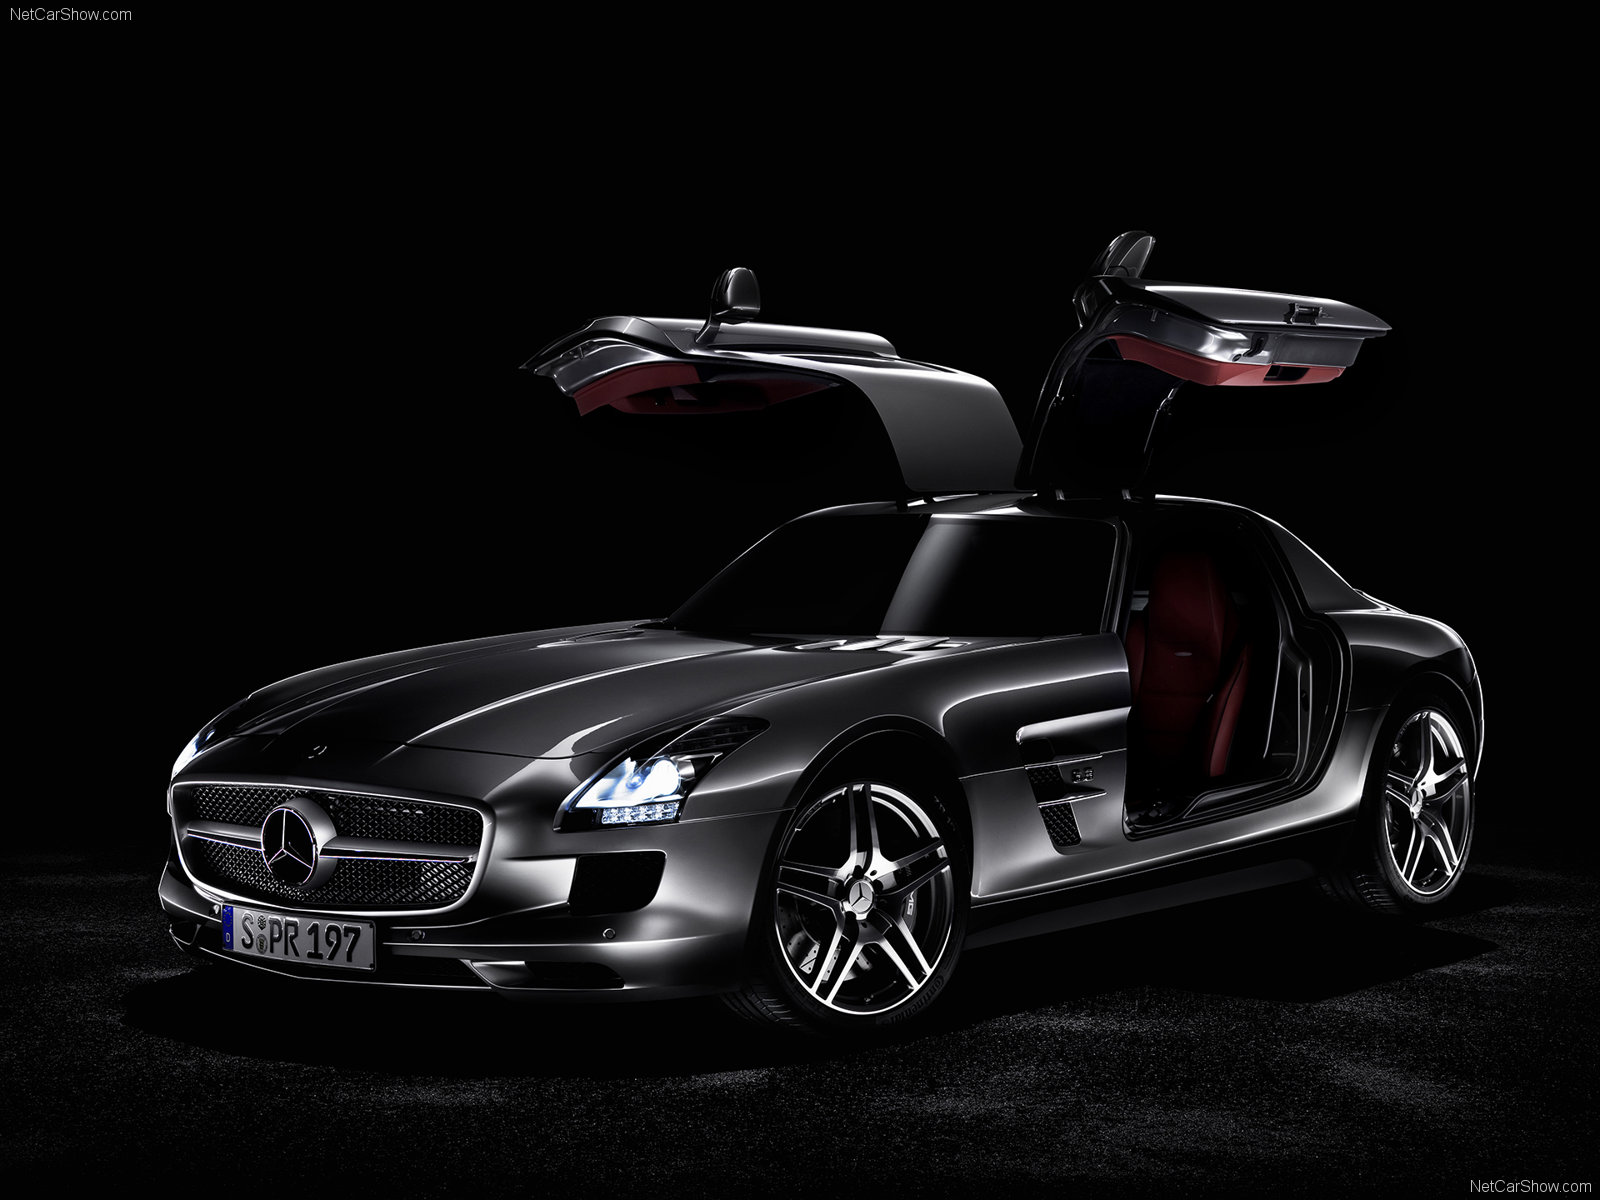 You can vote for this Mercedes-Benz SLS AMG photo